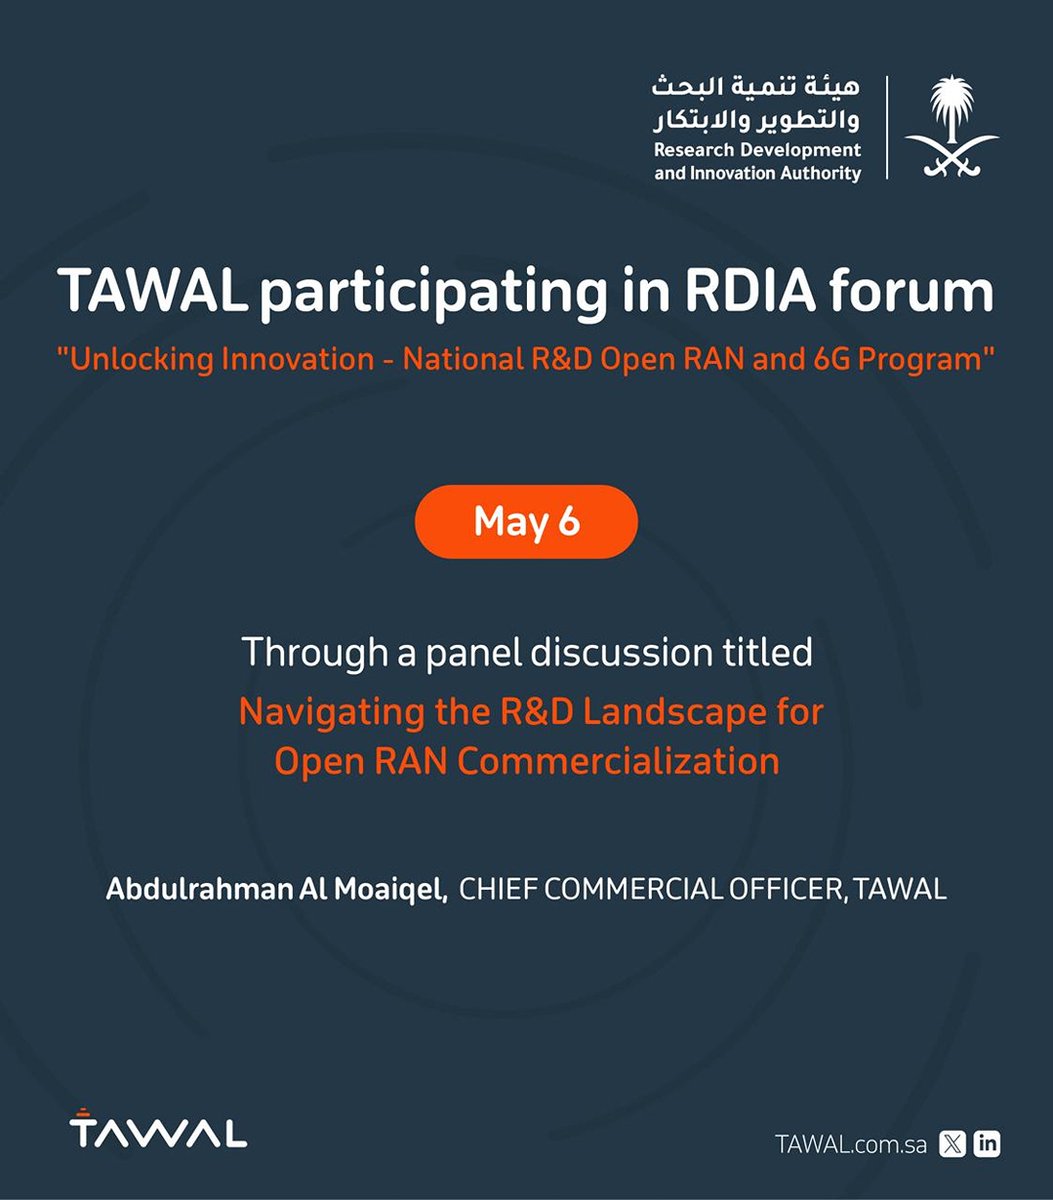 #TAWAL is pleased to announce its participation in the Open RAN & 6G Program Forum, in cooperation with the @RDIA as the forum highlights the latest technologies used in open RAN communications networks.